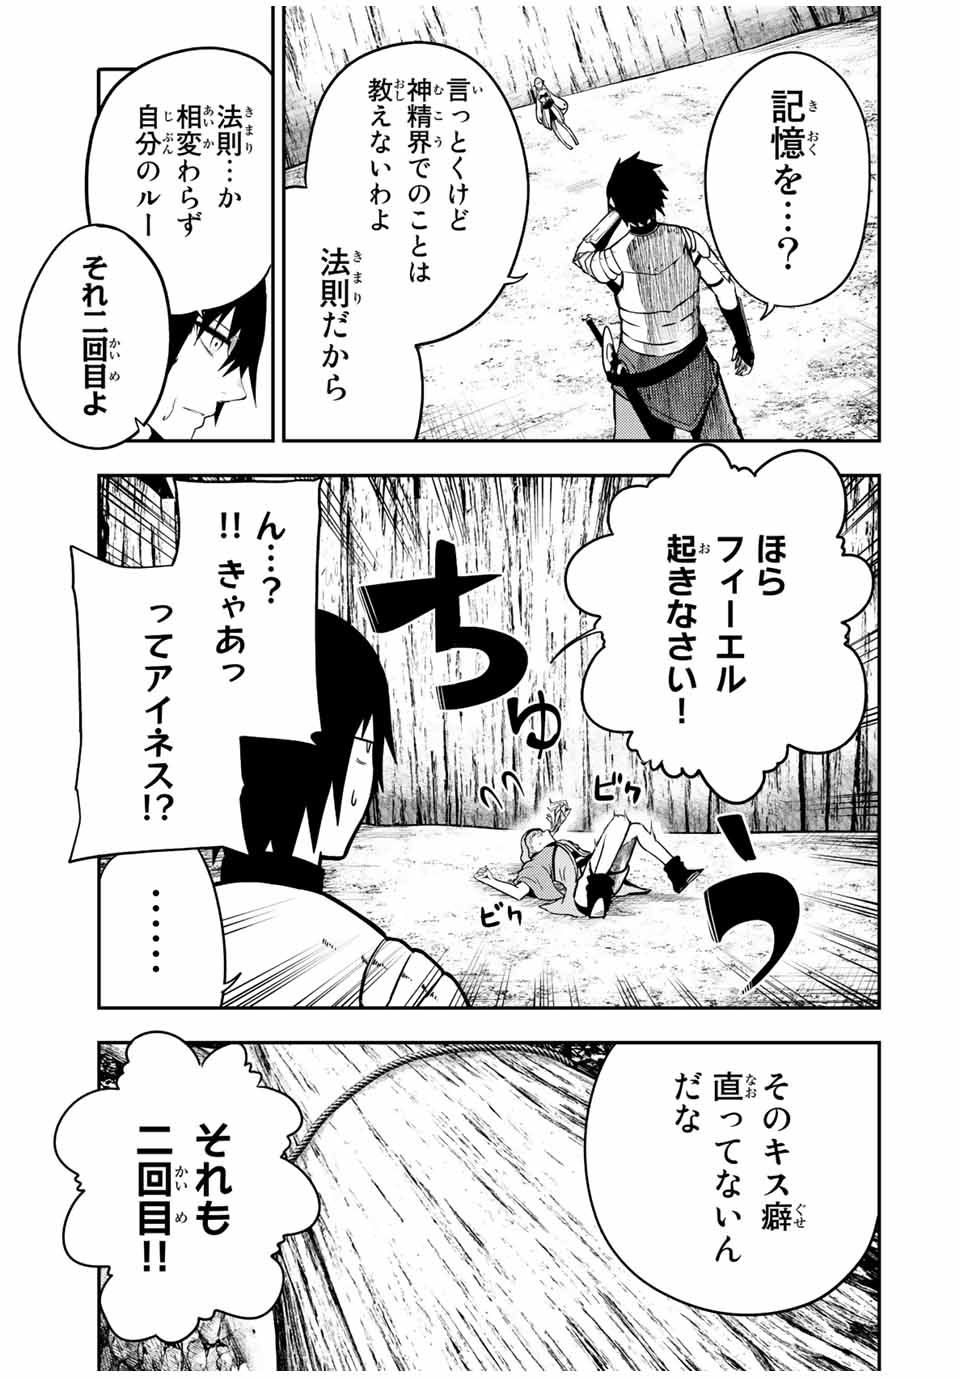 the strongest former prince-; 奴隷転生 ～その奴隷、最強の元王子につき～ 第78話 - Page 3